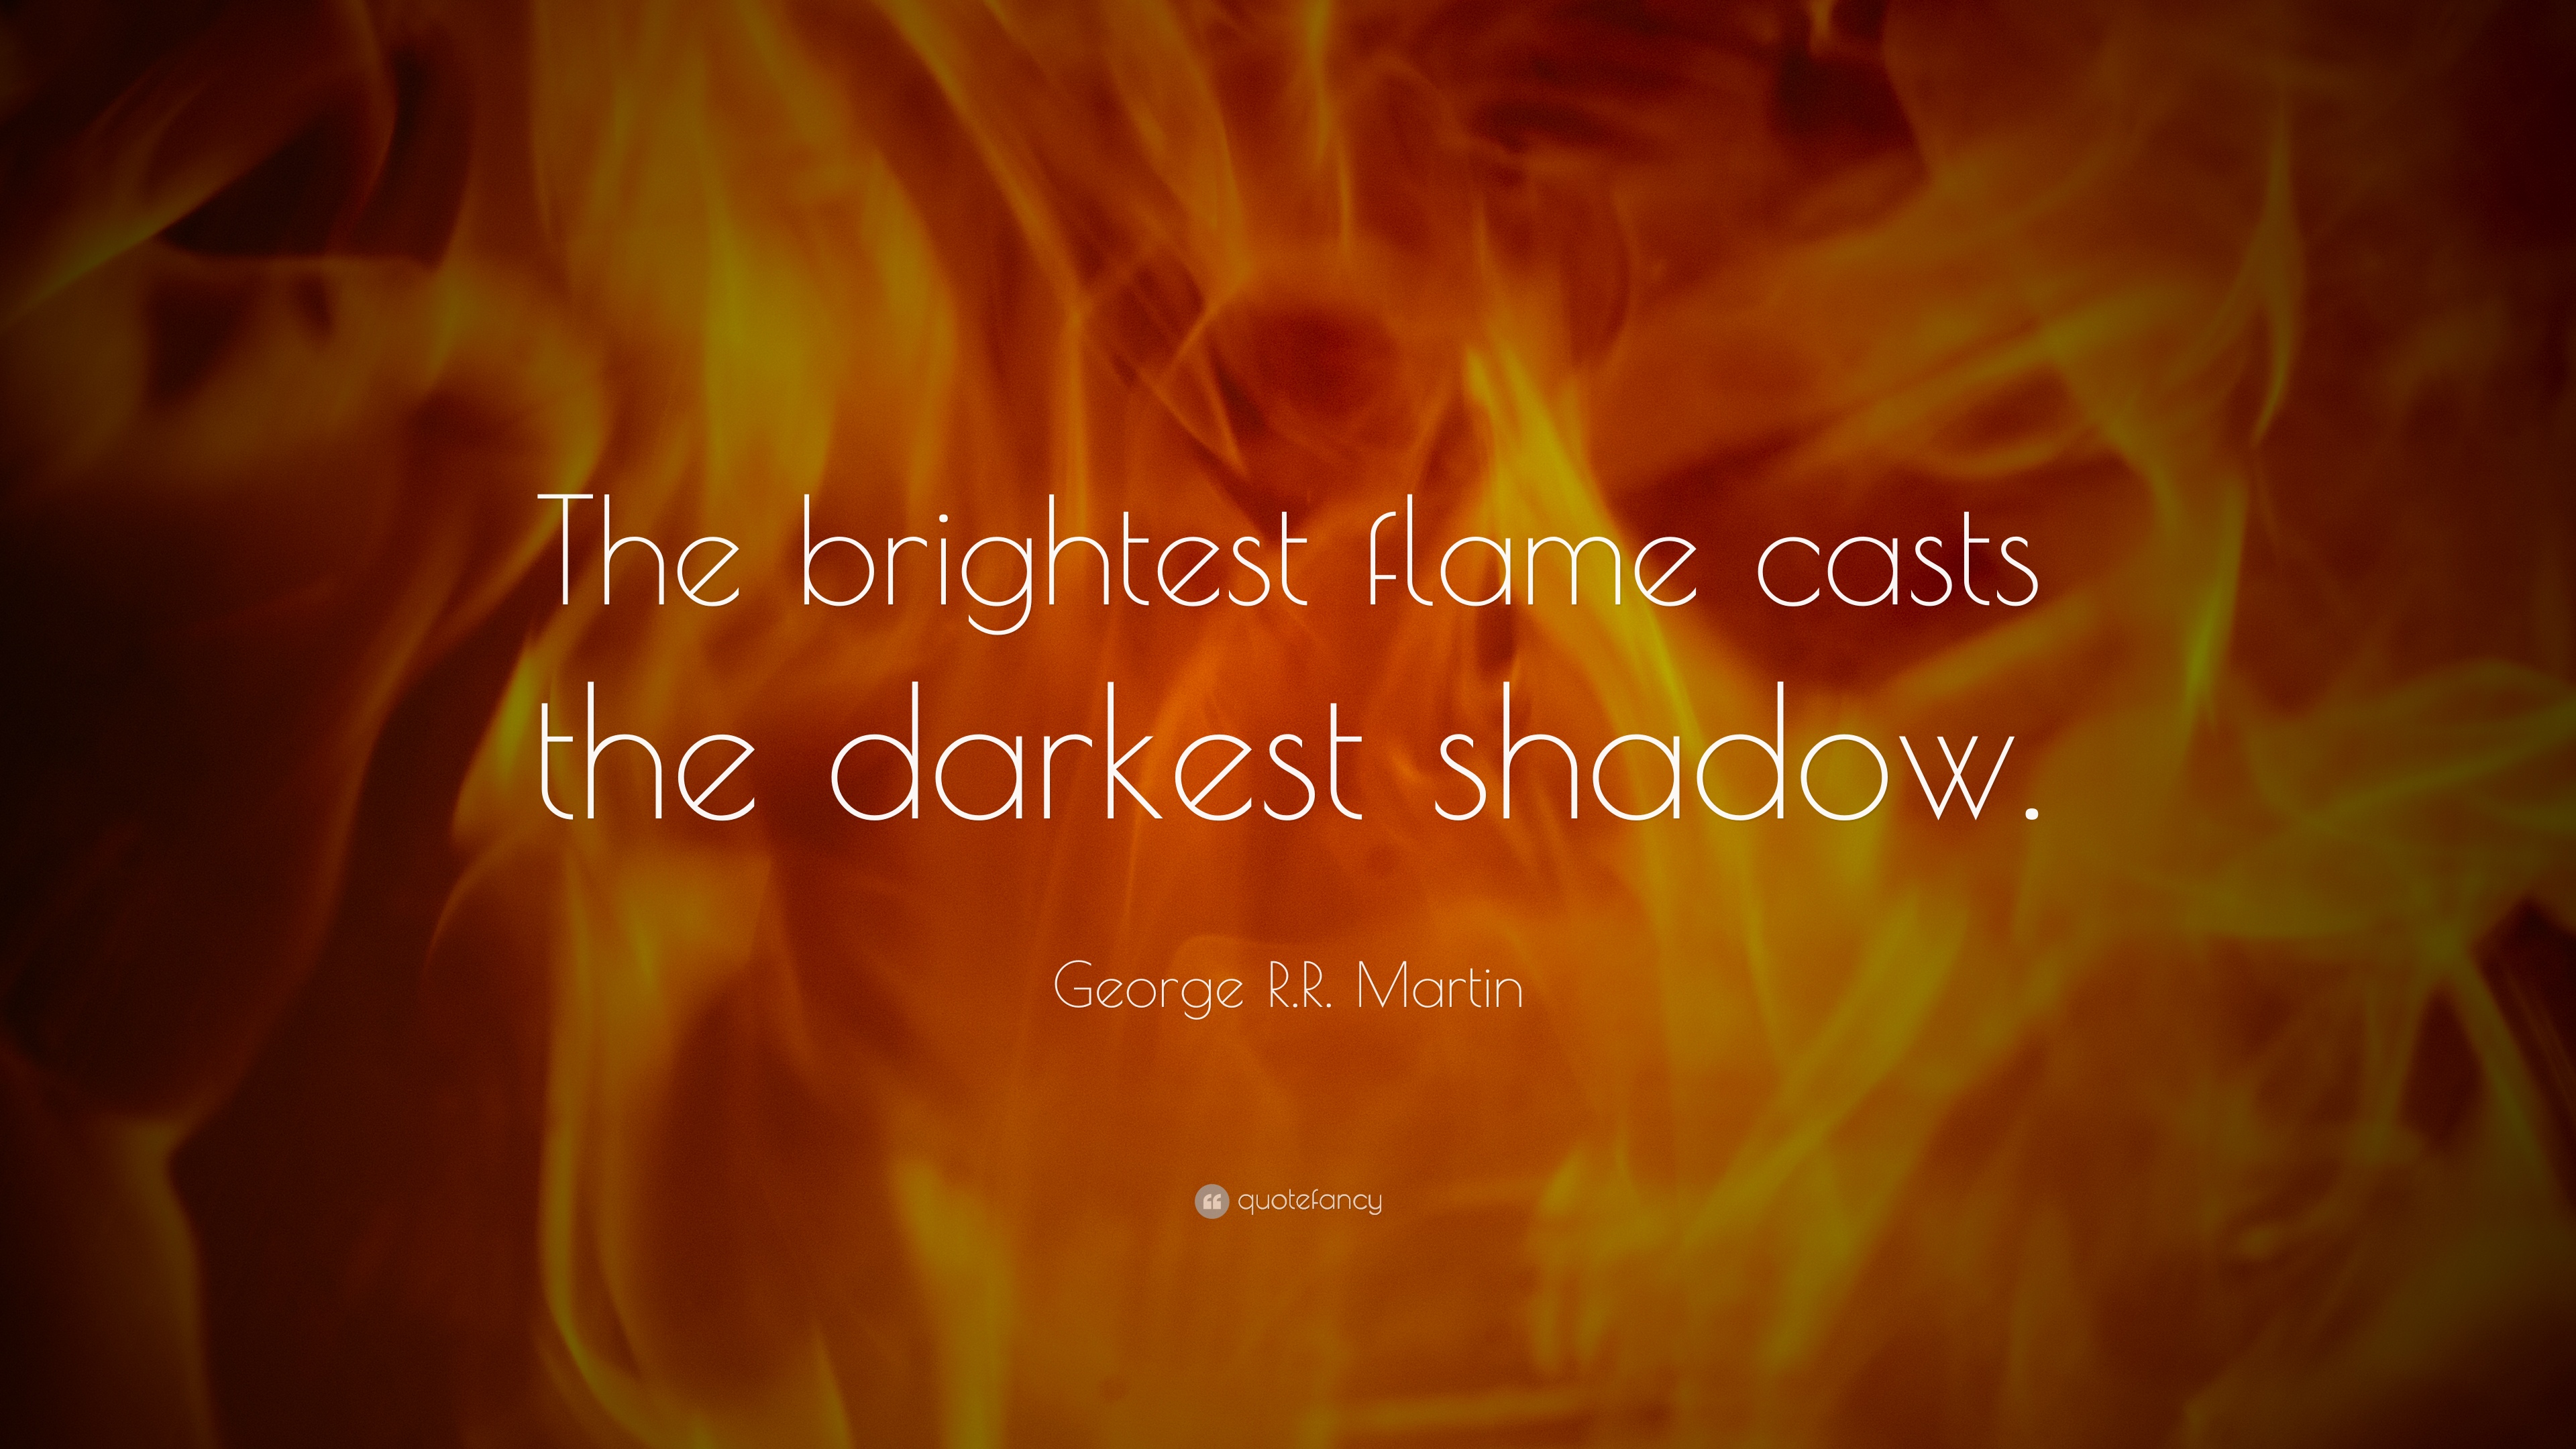 George R.R. Martin Quote: “The brightest flame casts the darkest ...